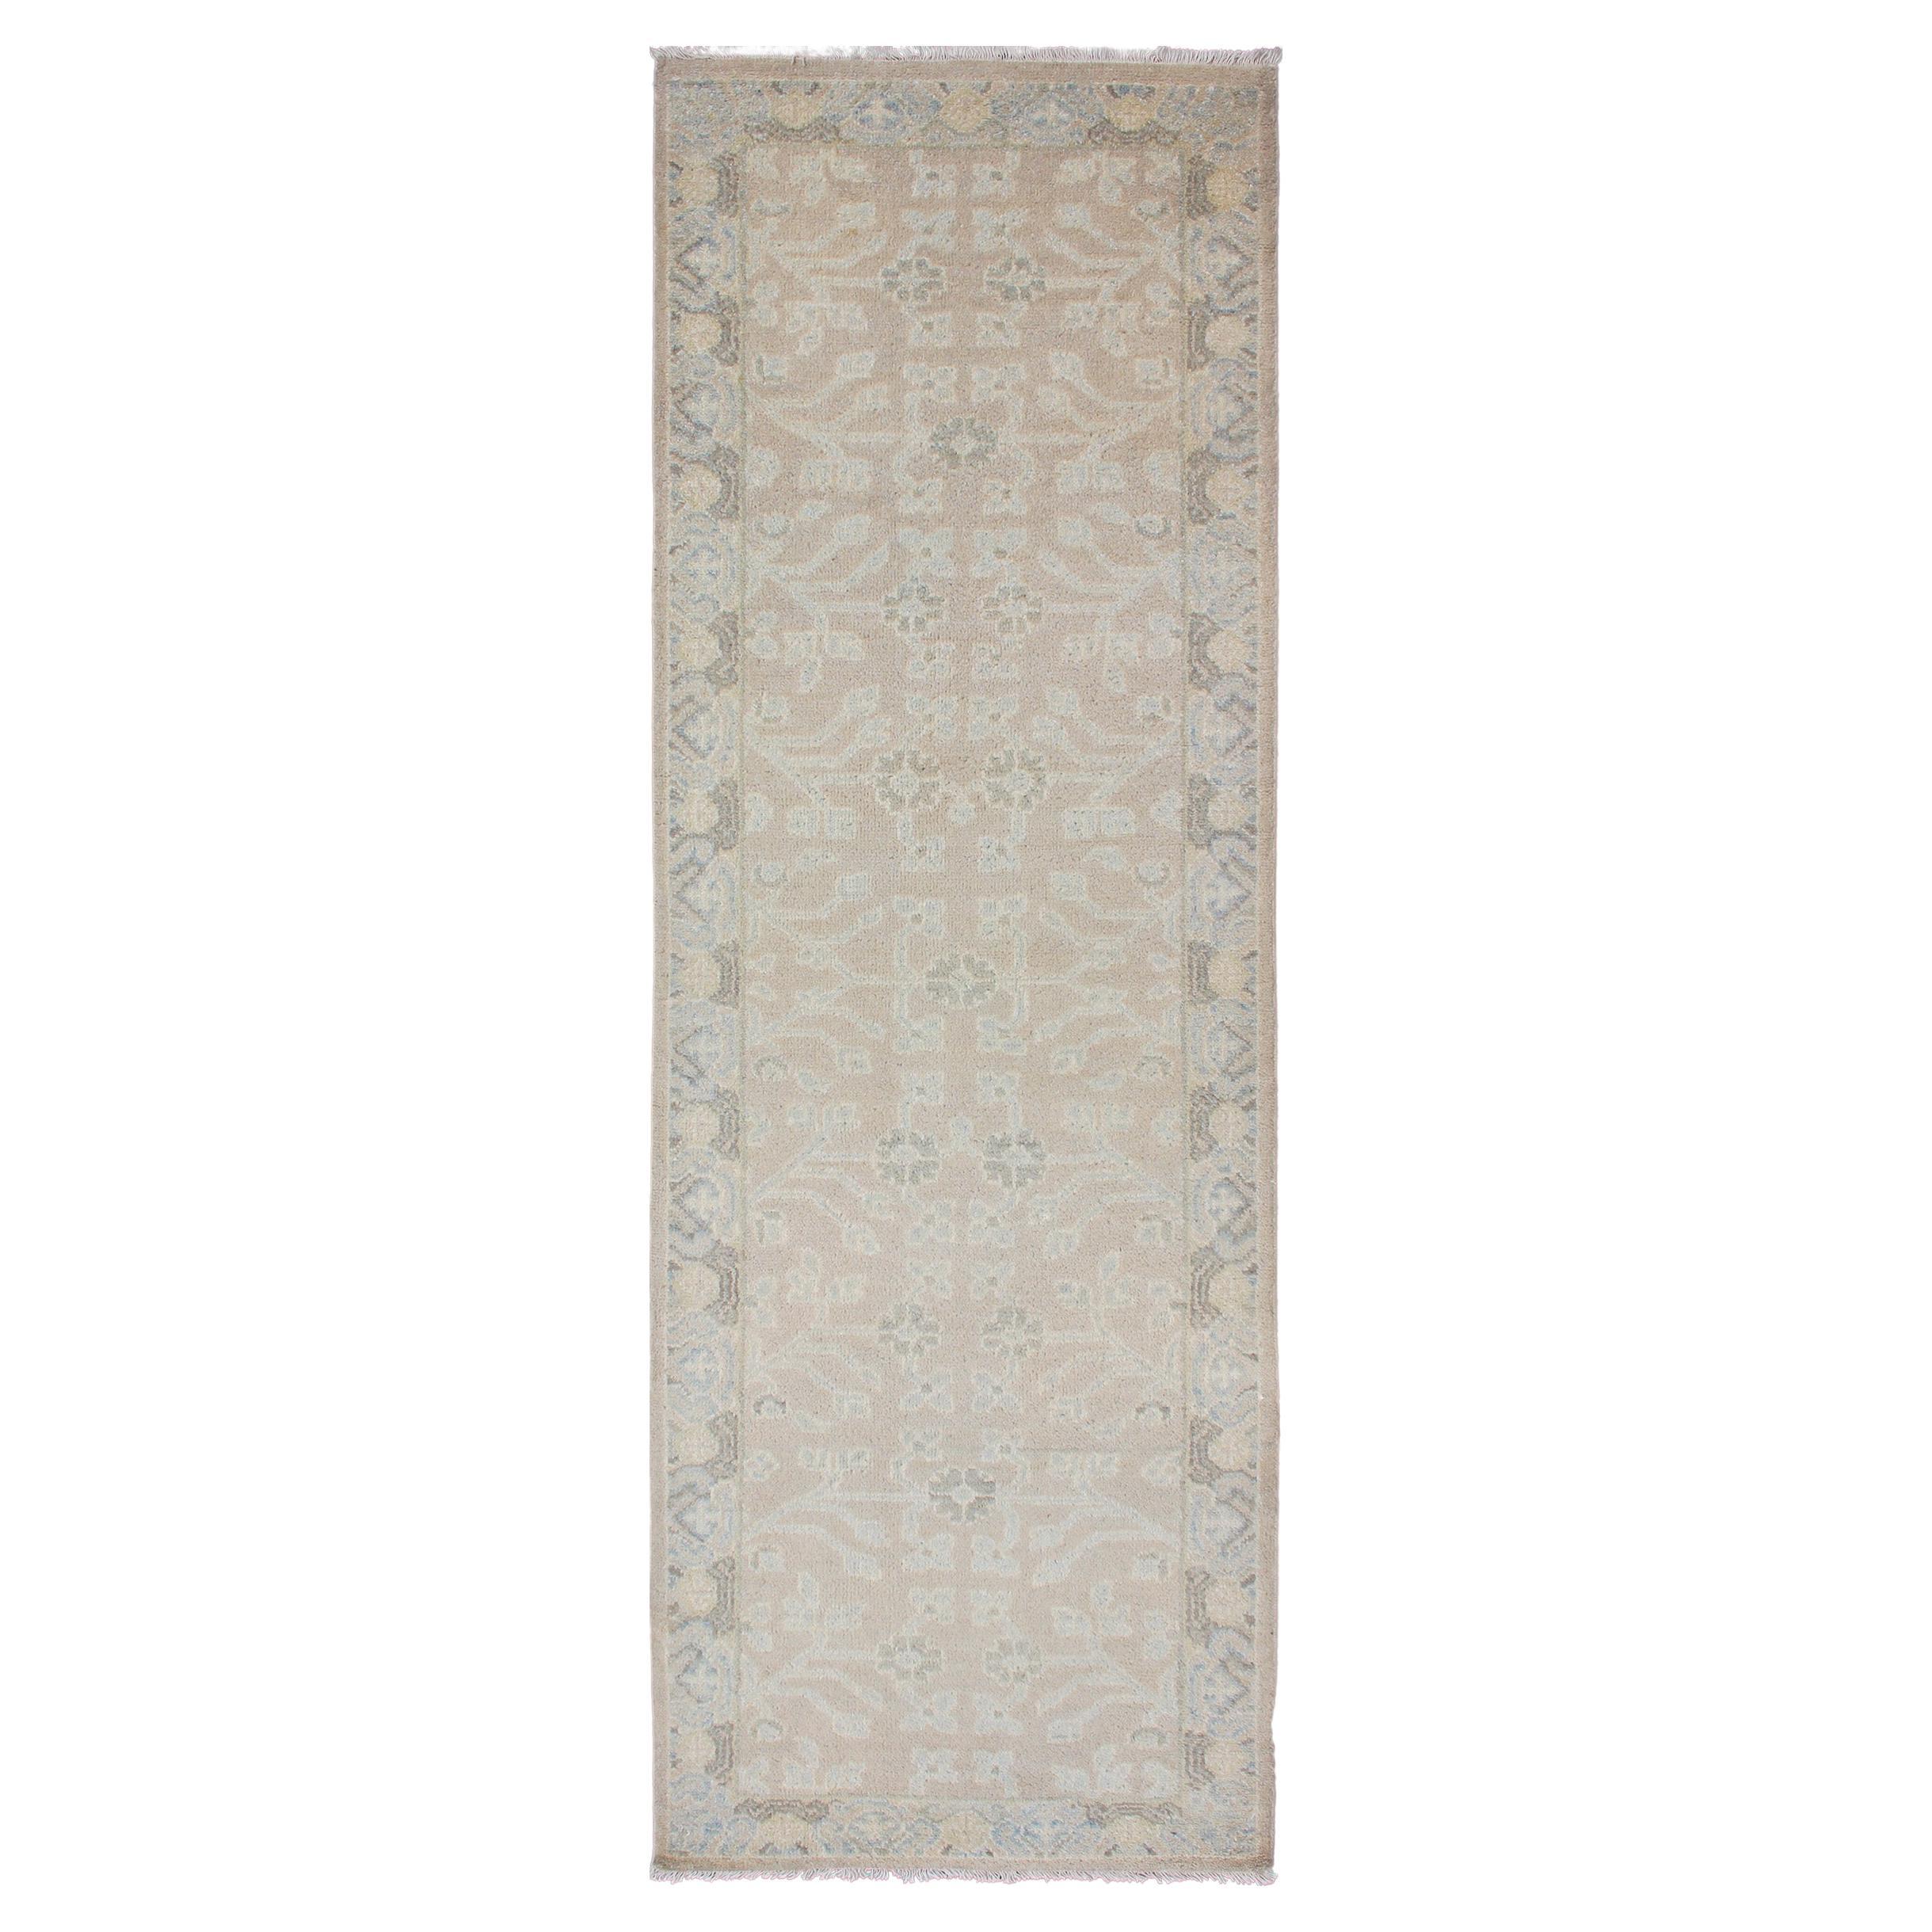 Keivan Woven Arts Khotan Runner in Wool with All-Over Sub-Geometric Design